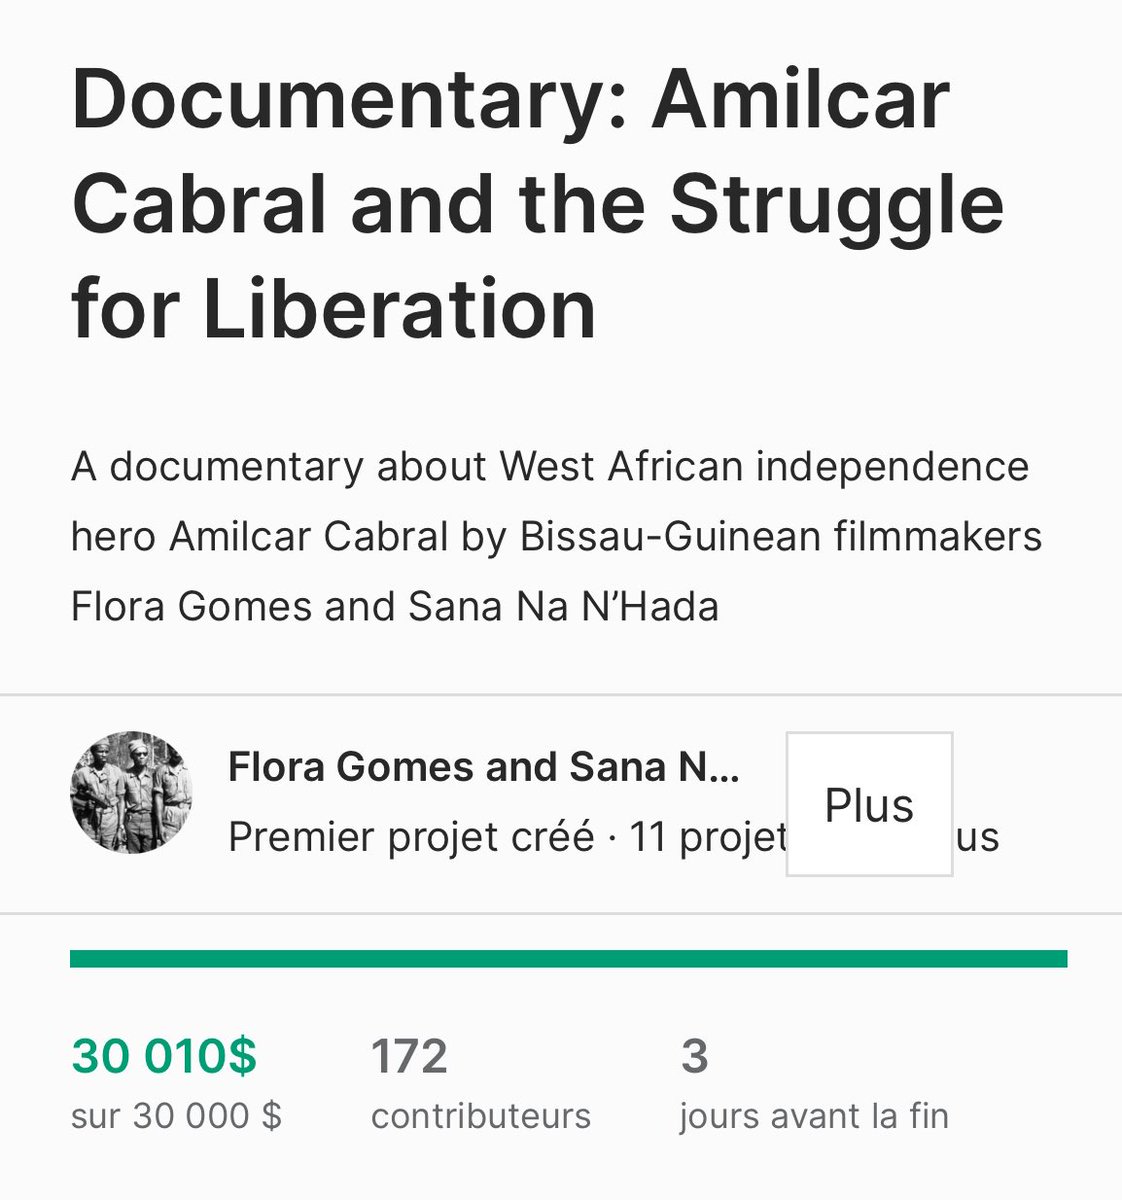 We did it!! THANK YOU EVERYONE !! Flora Gomes and Sana Na N’Hada surpassed their goal! 🖤🖤🖤